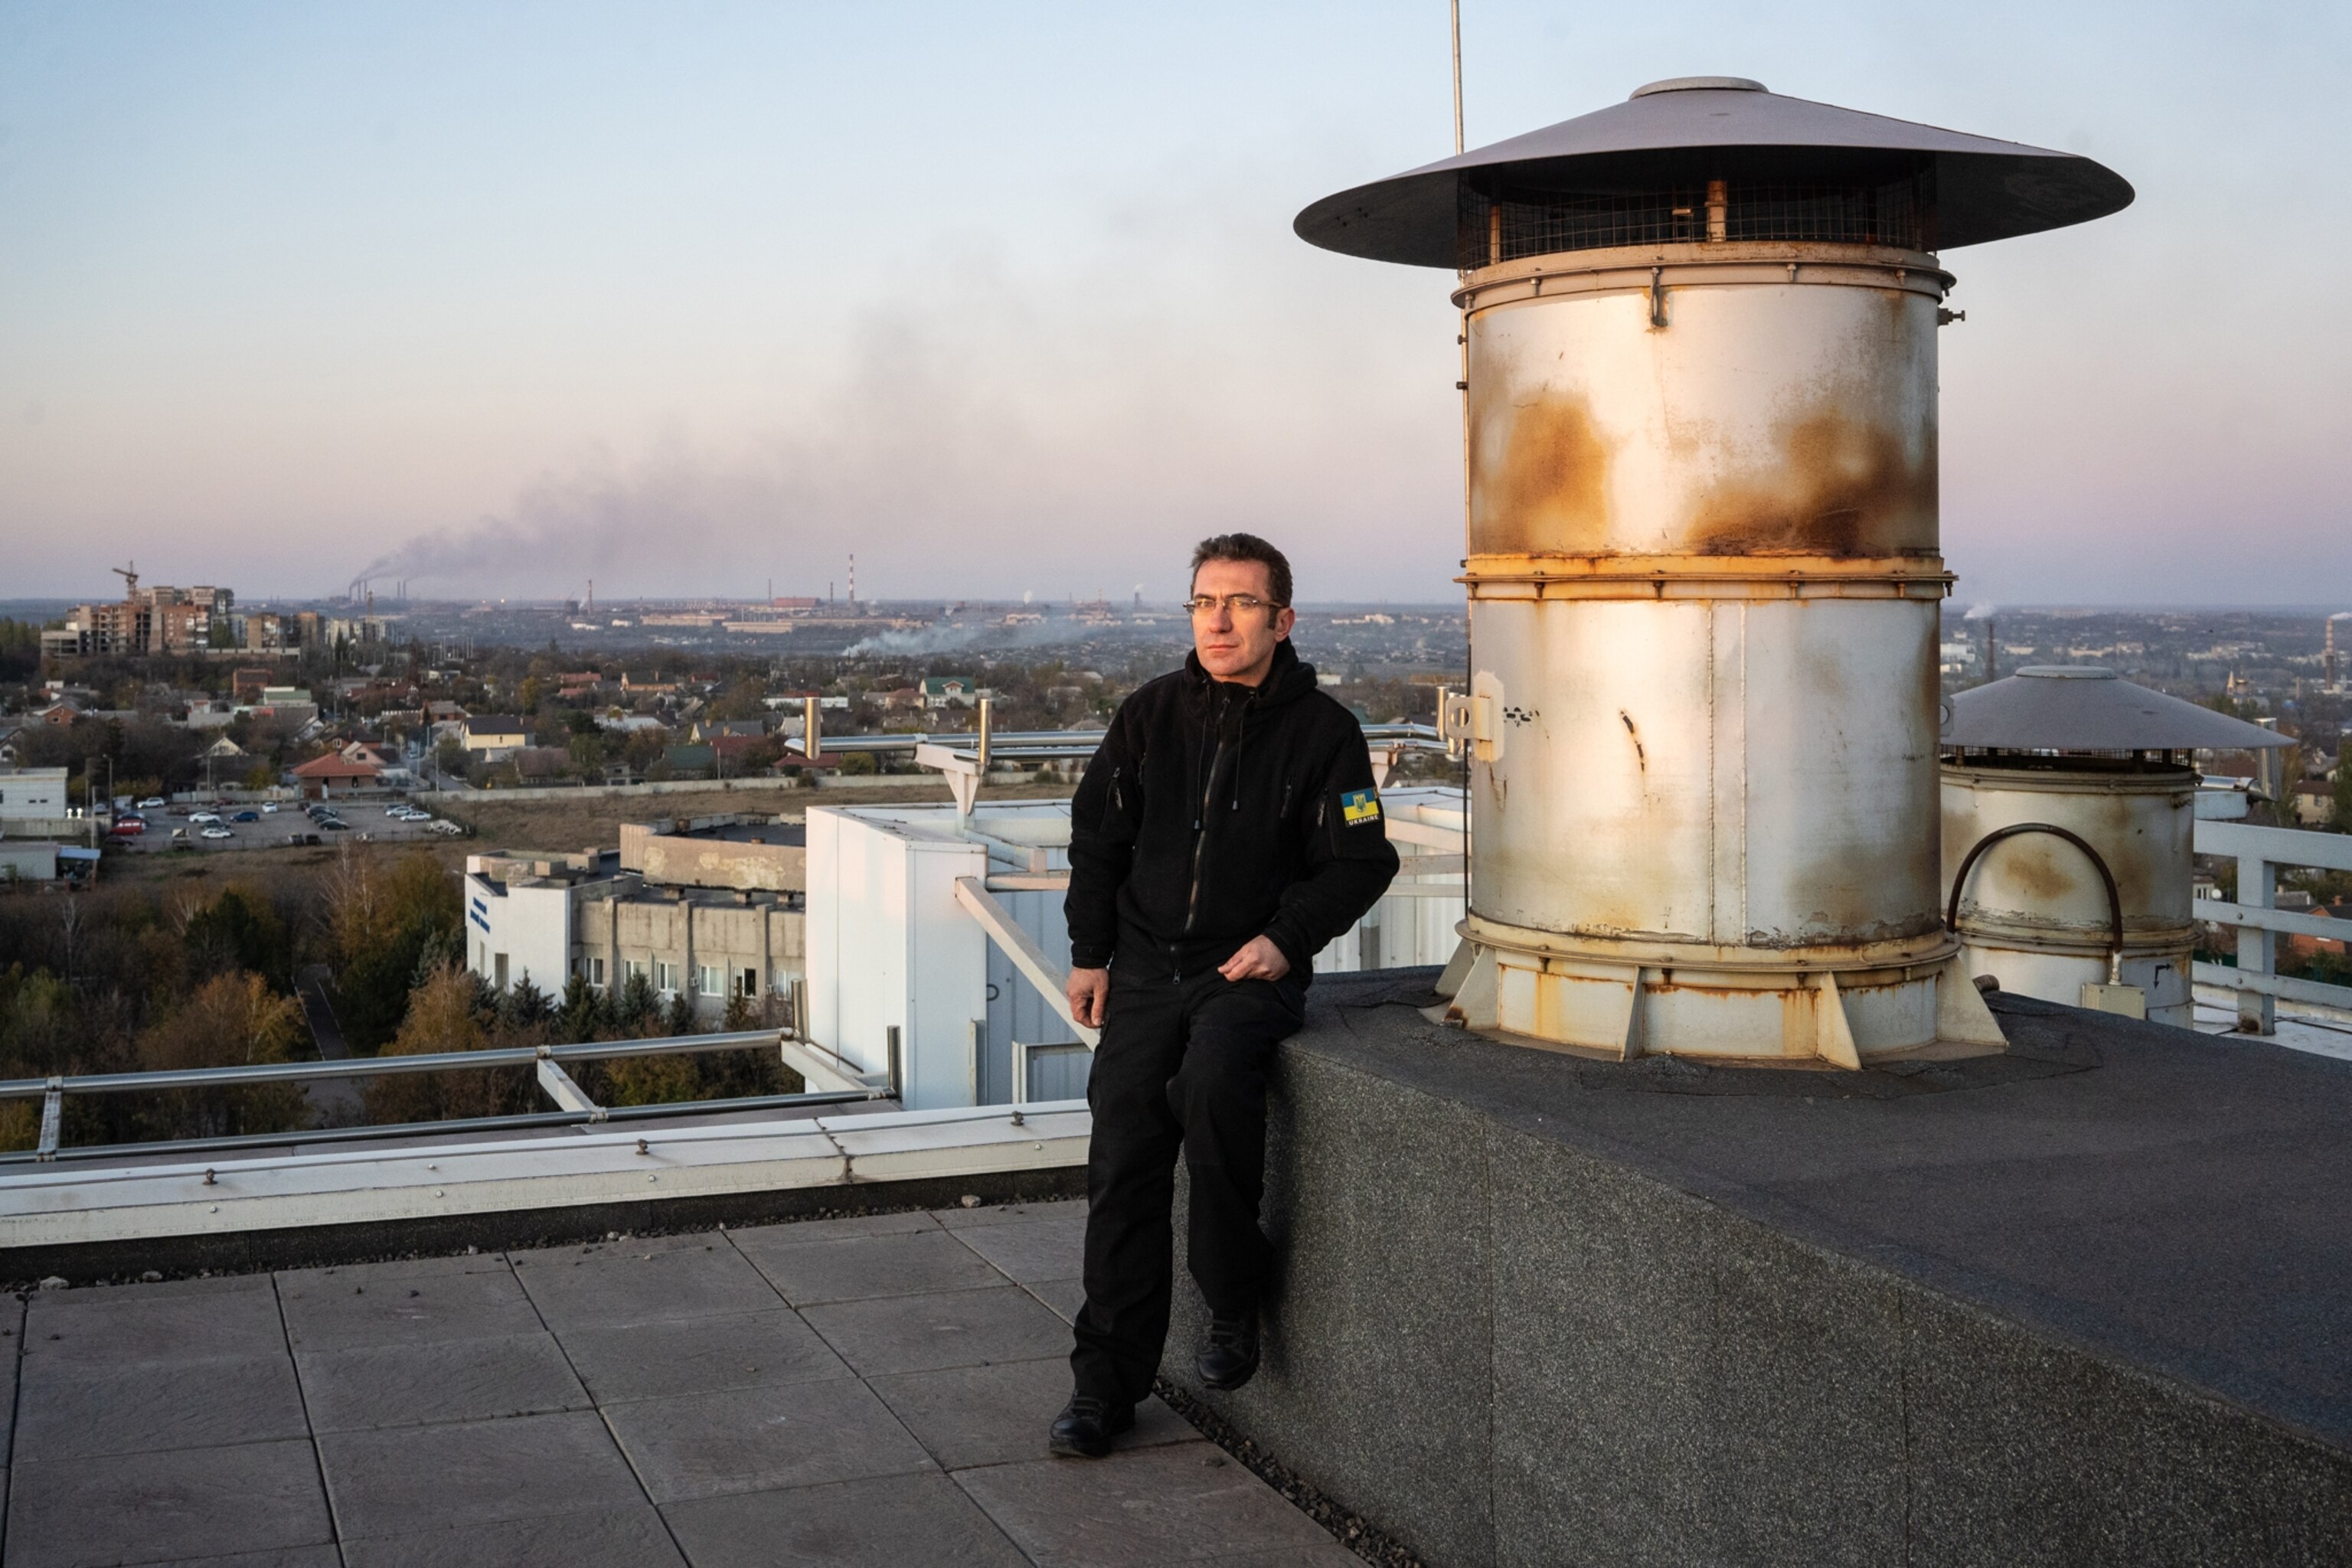 a portrait of a man on the roof of an old building with the city and factory smoke behind him